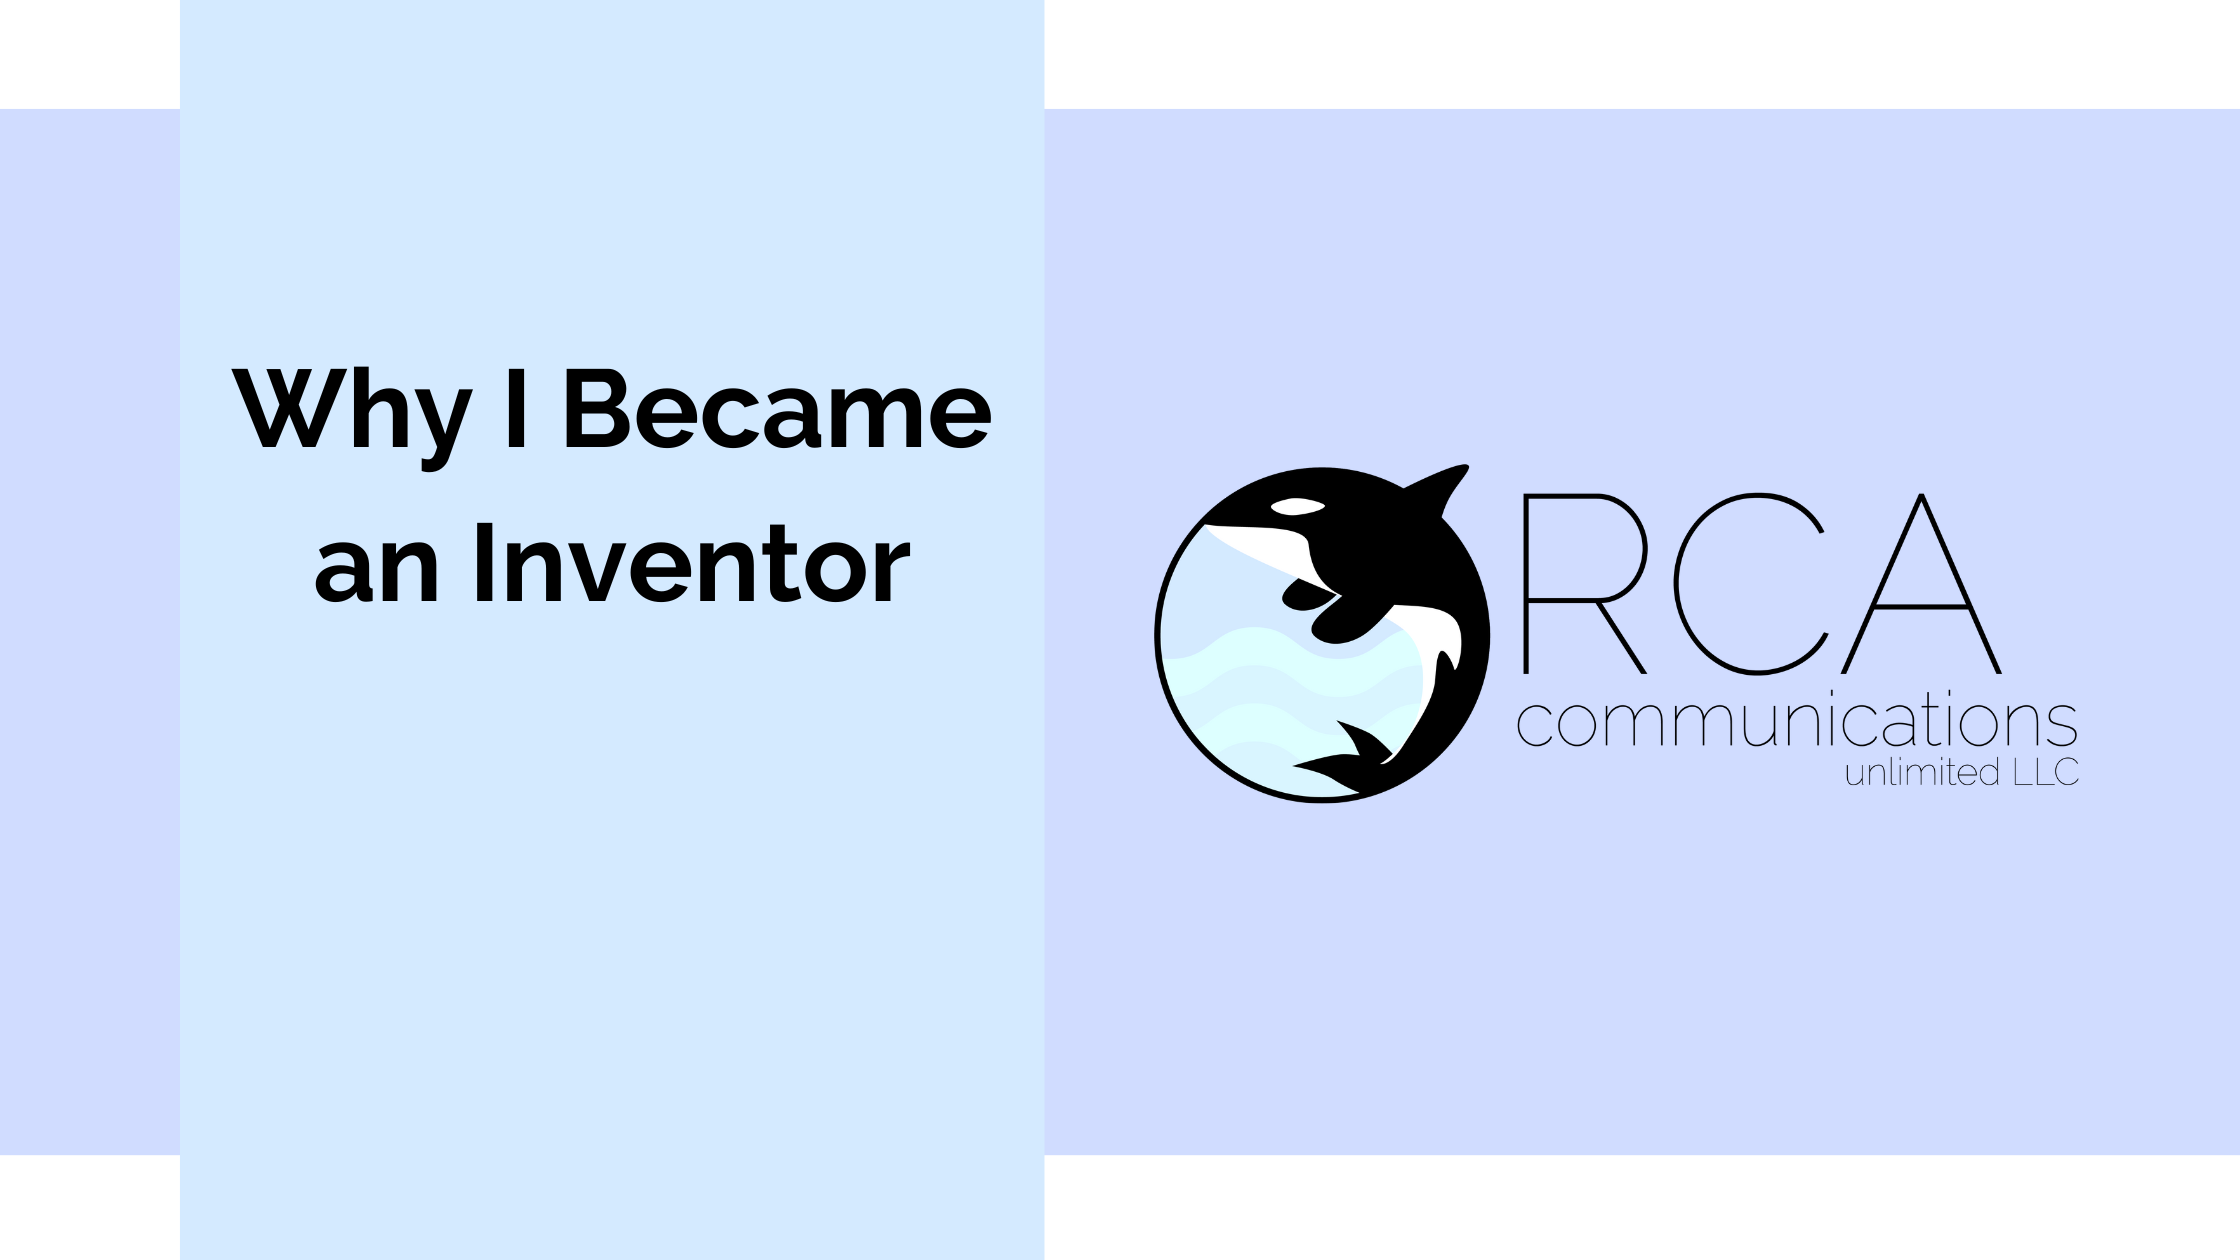 Why I Became an Inventor